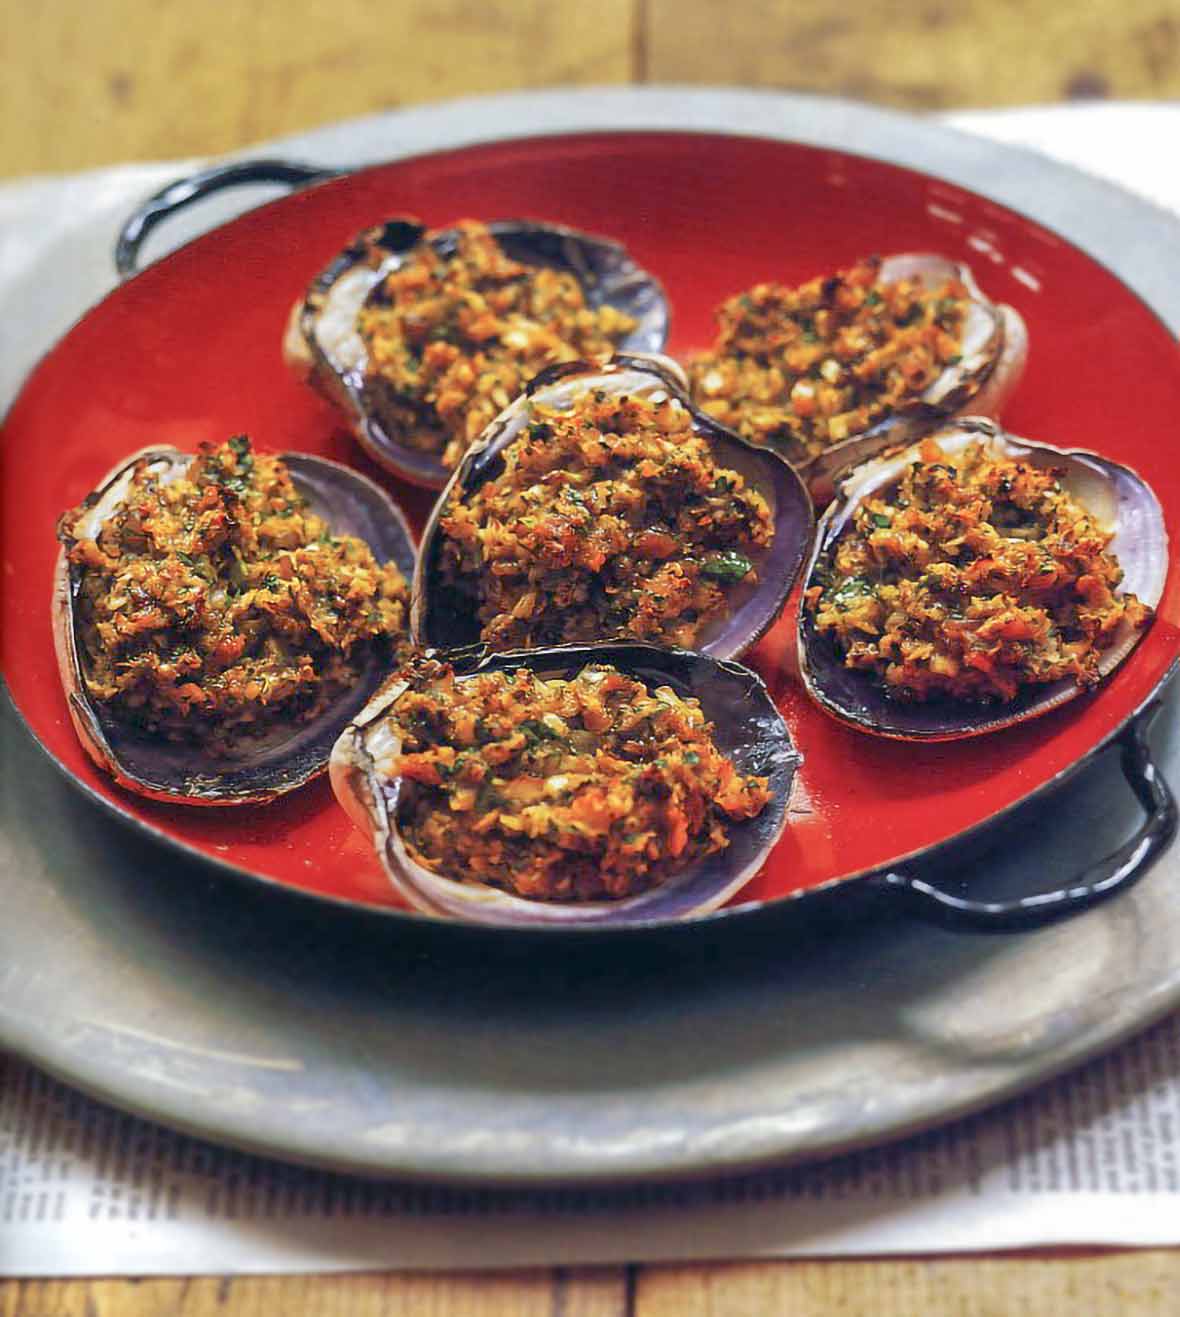 Red plate of six stuffed quahogs clams stuffed with breadcrumbs, chopped clams, parsley, Old Bay Seasoning